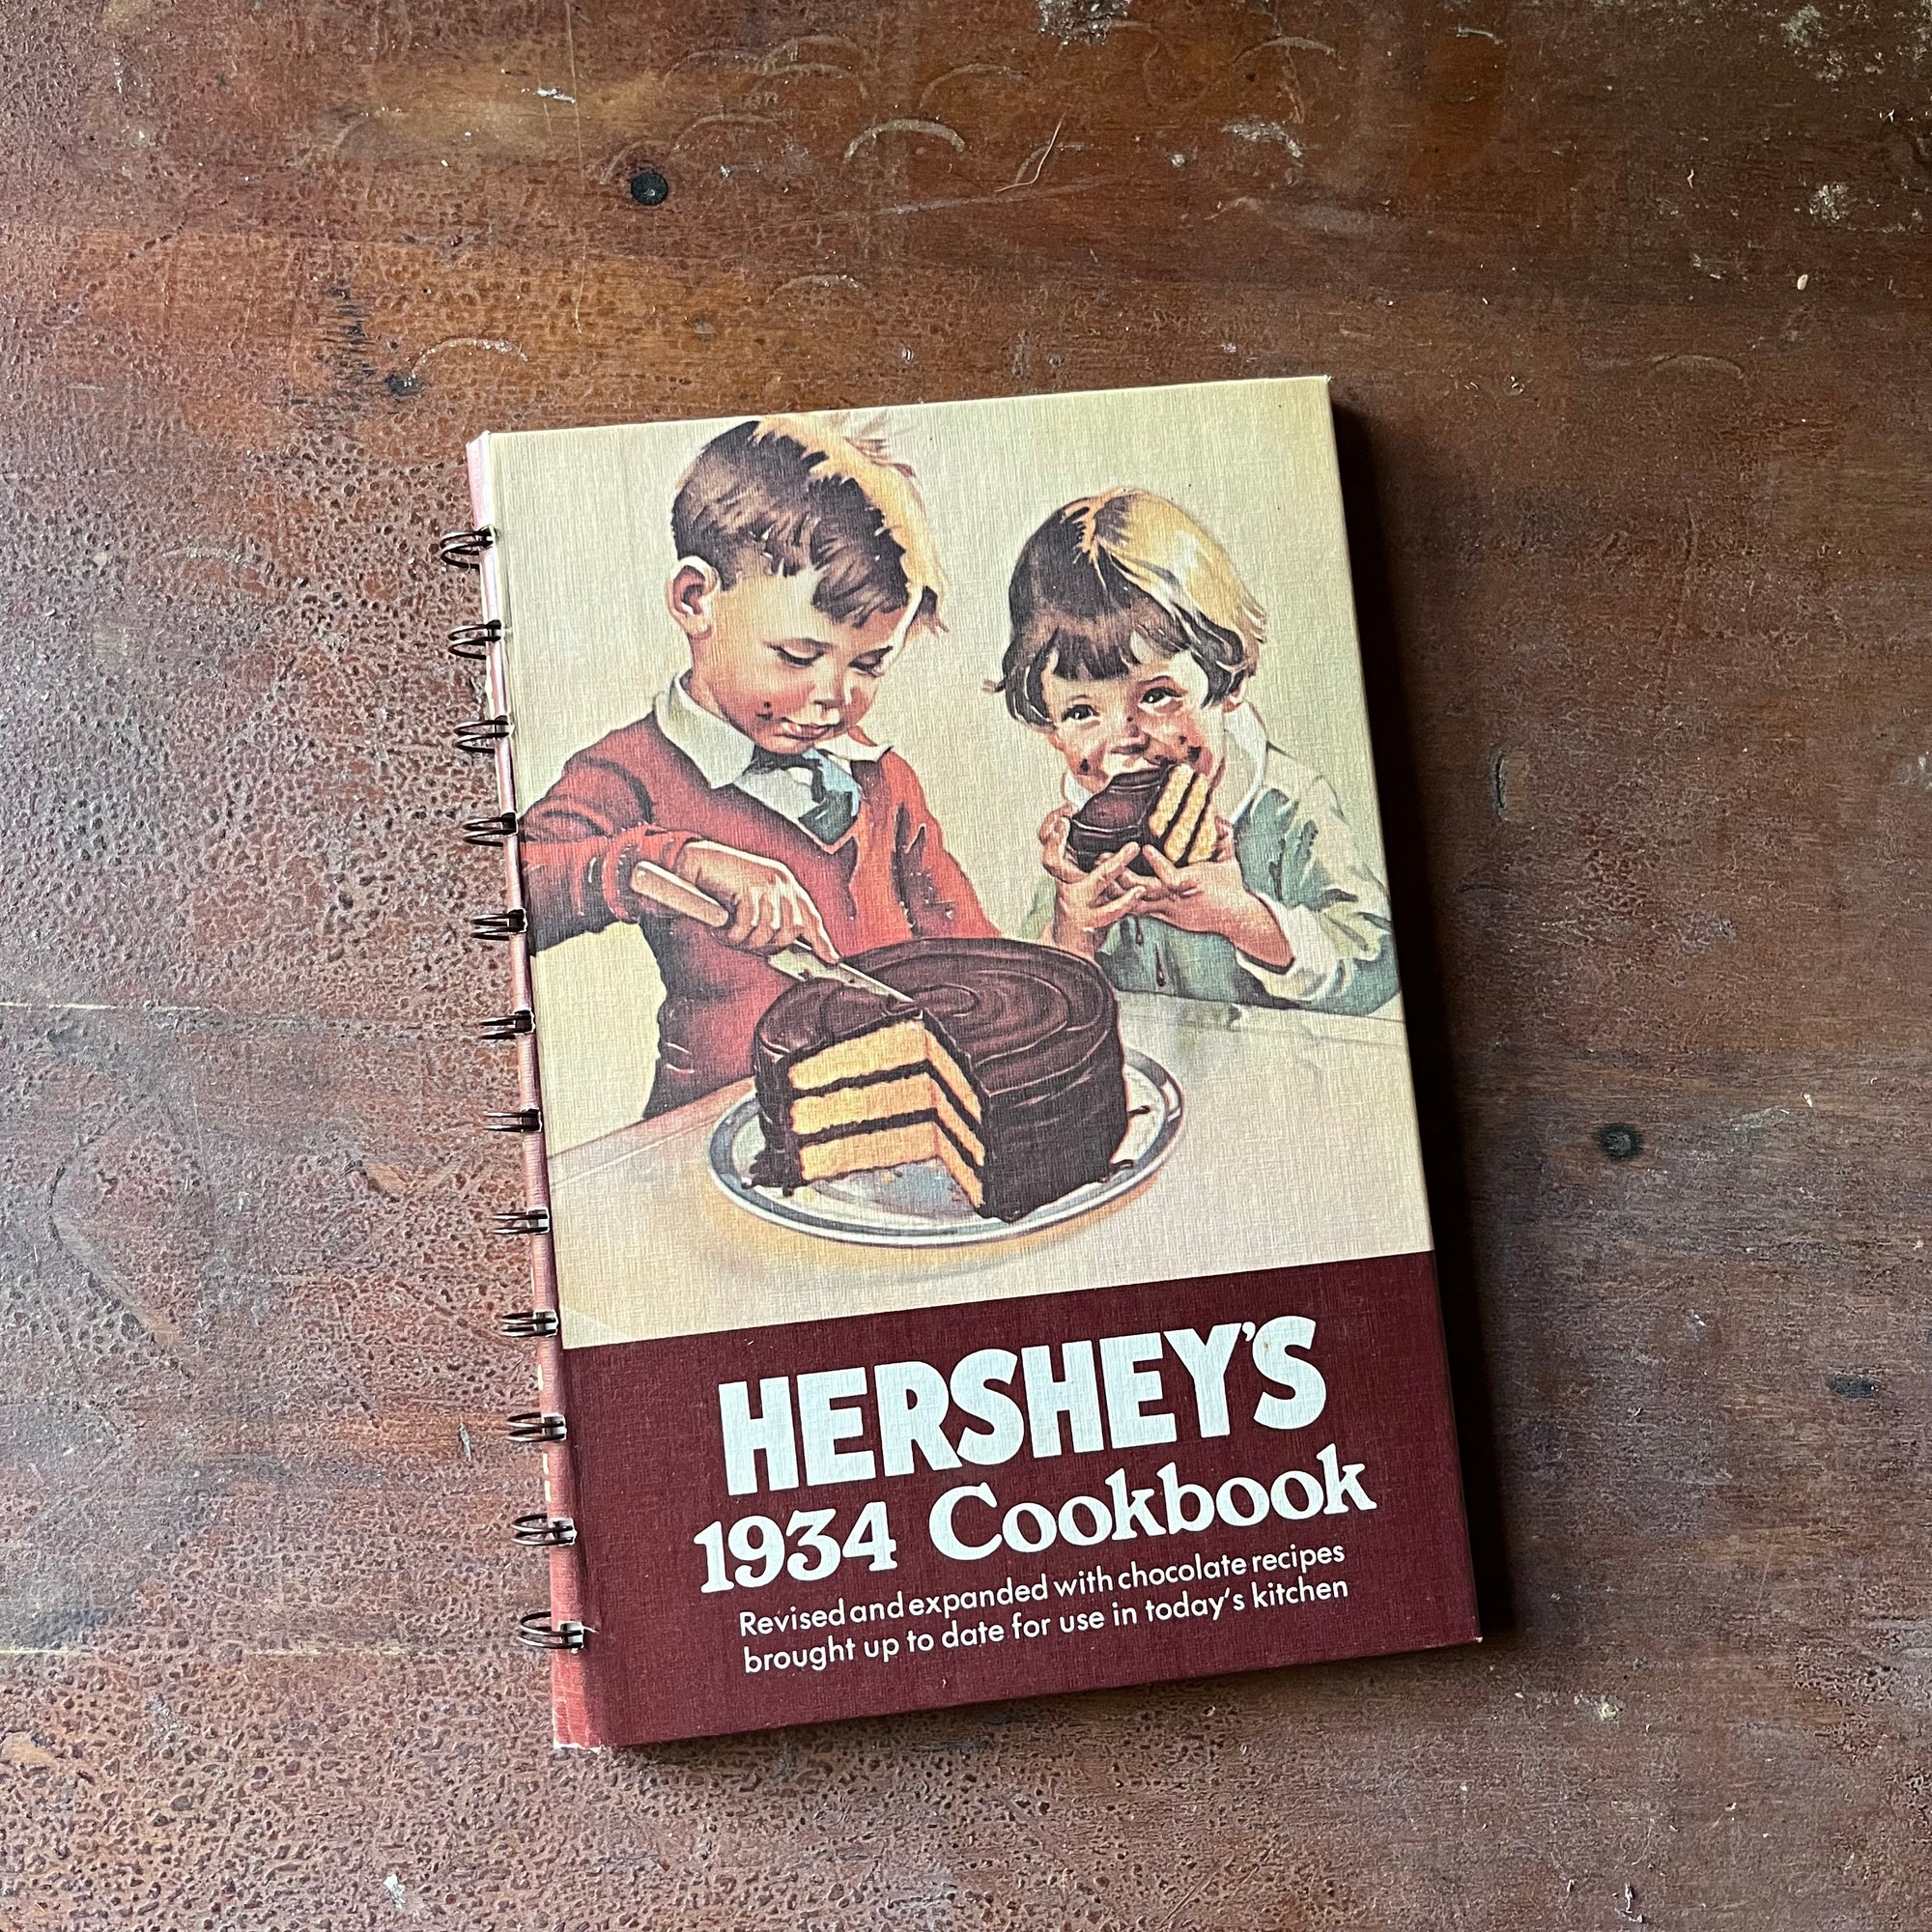 Hershey's 1934 Cookbook - view of the front cover